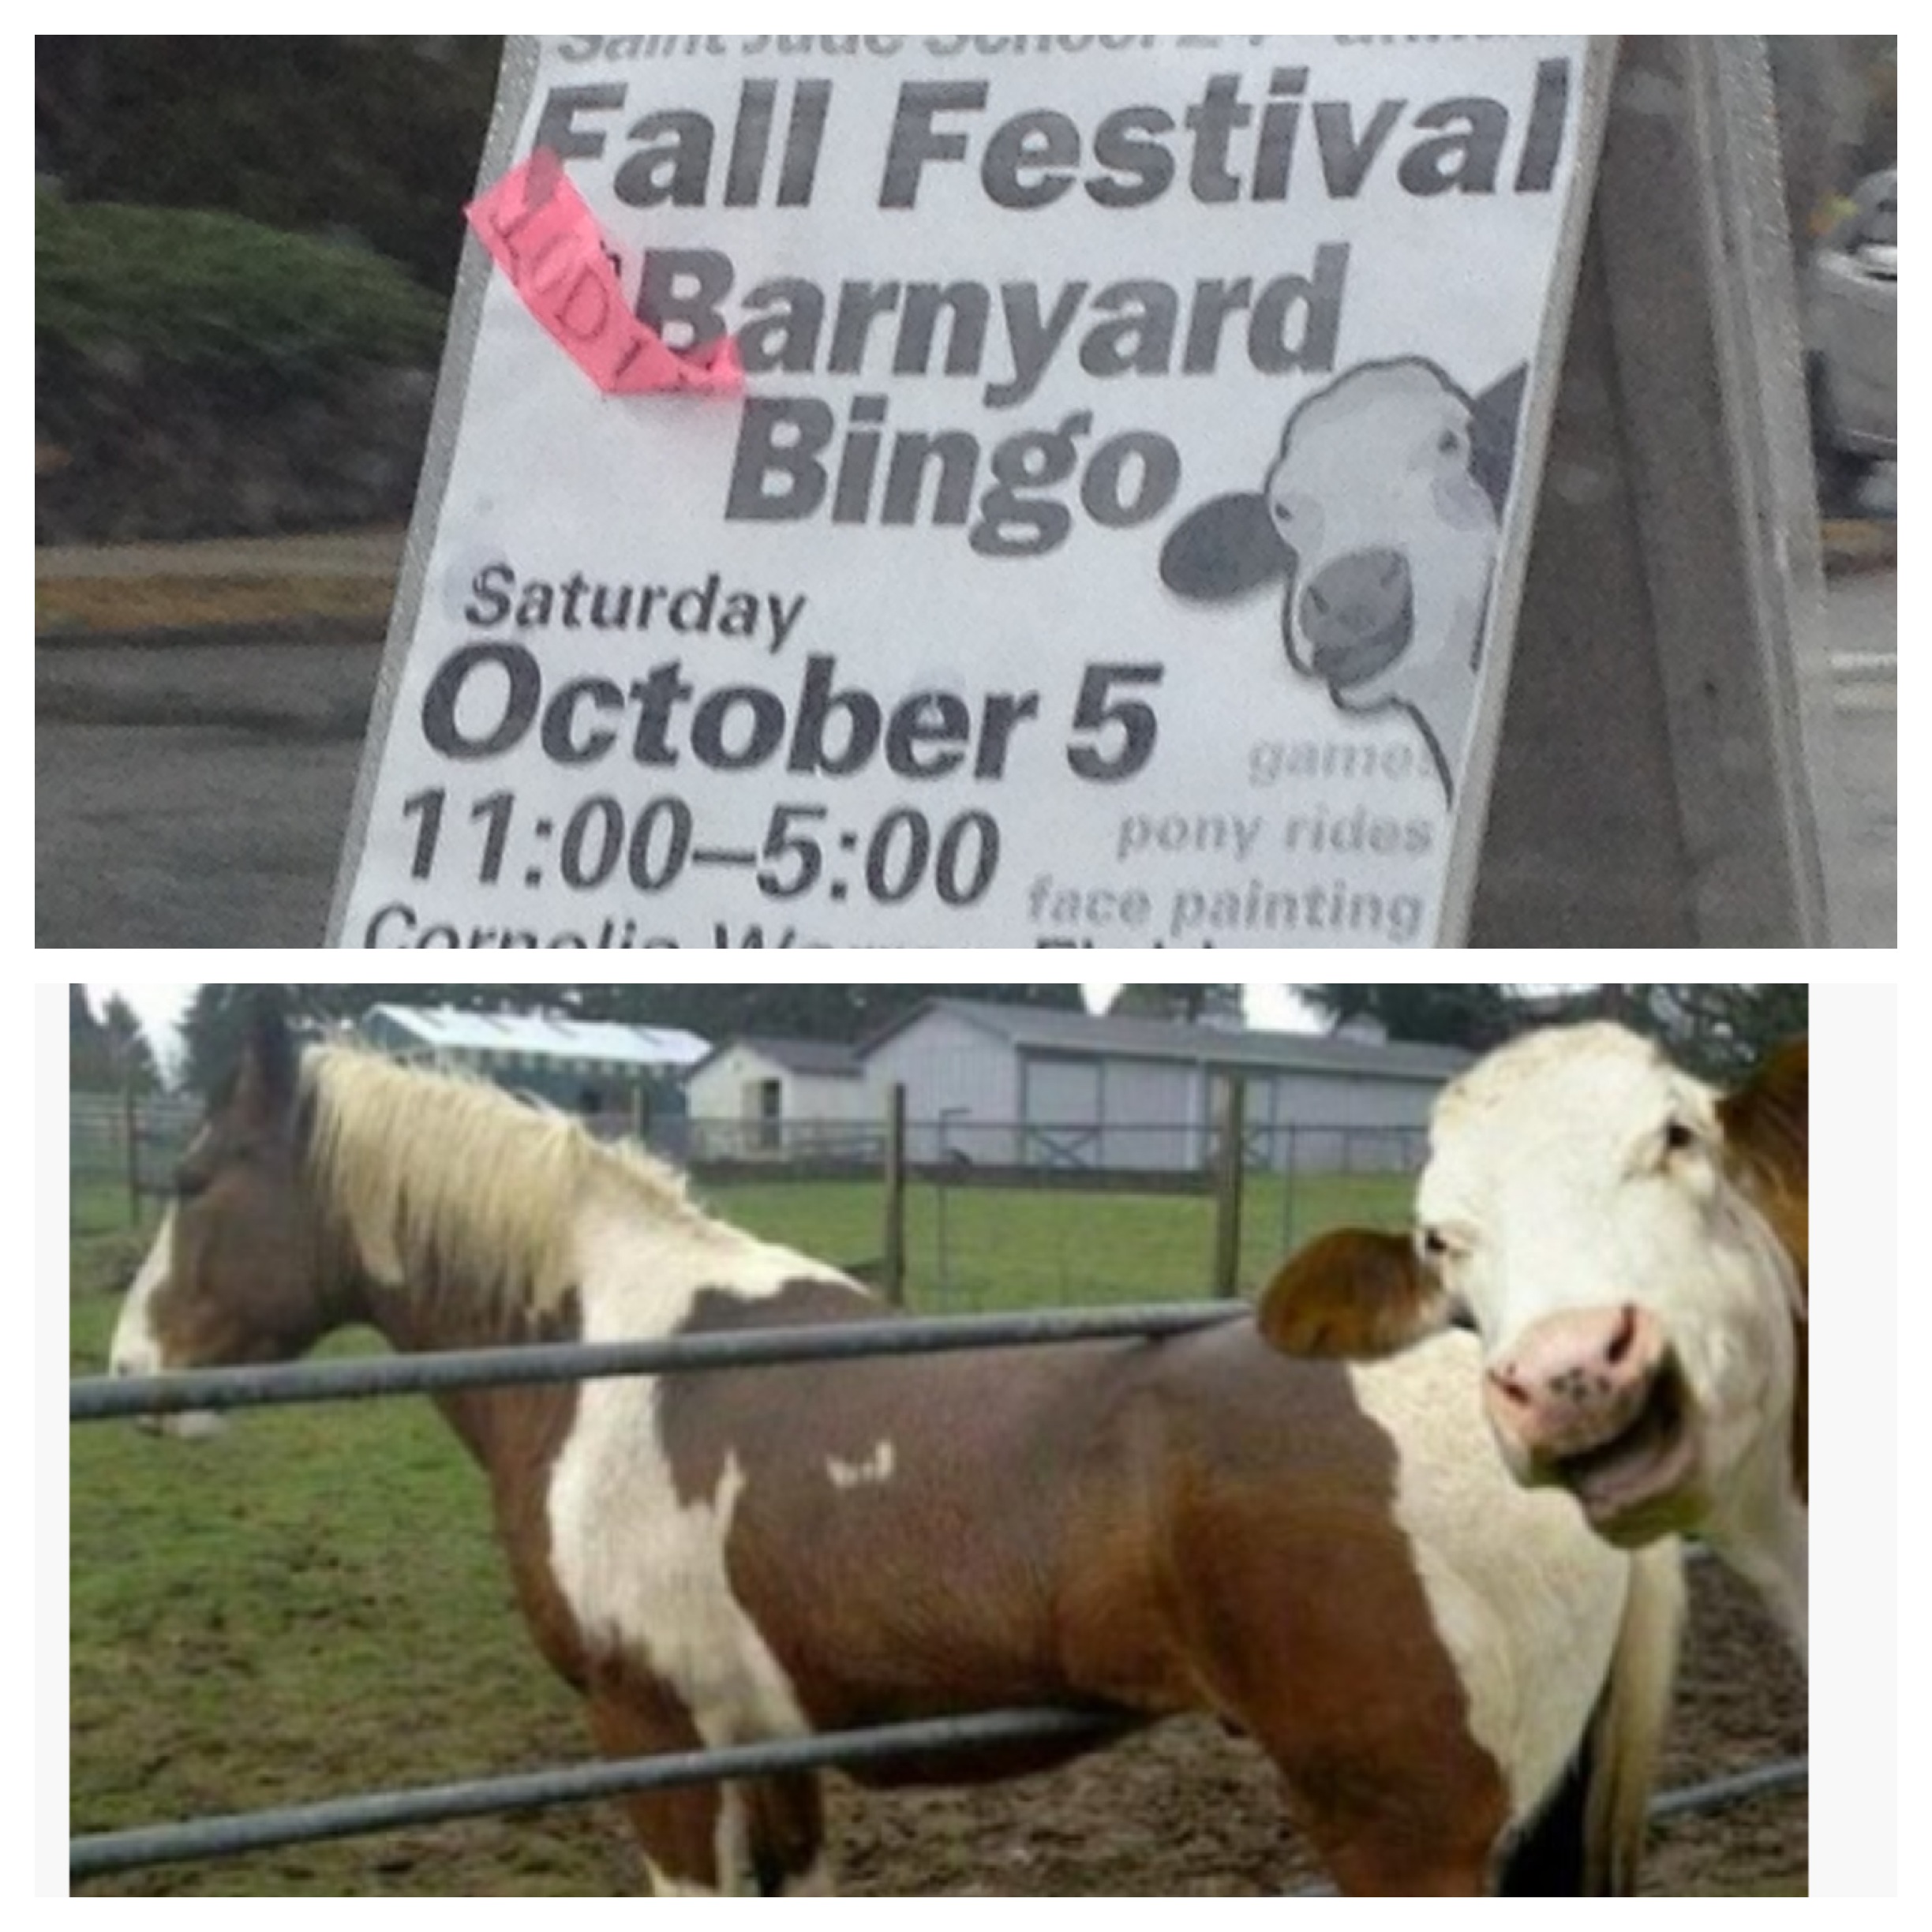 Advertisement on the side of the road for a barnyard bingo, with the source pic of the smiling cow graphic it used.